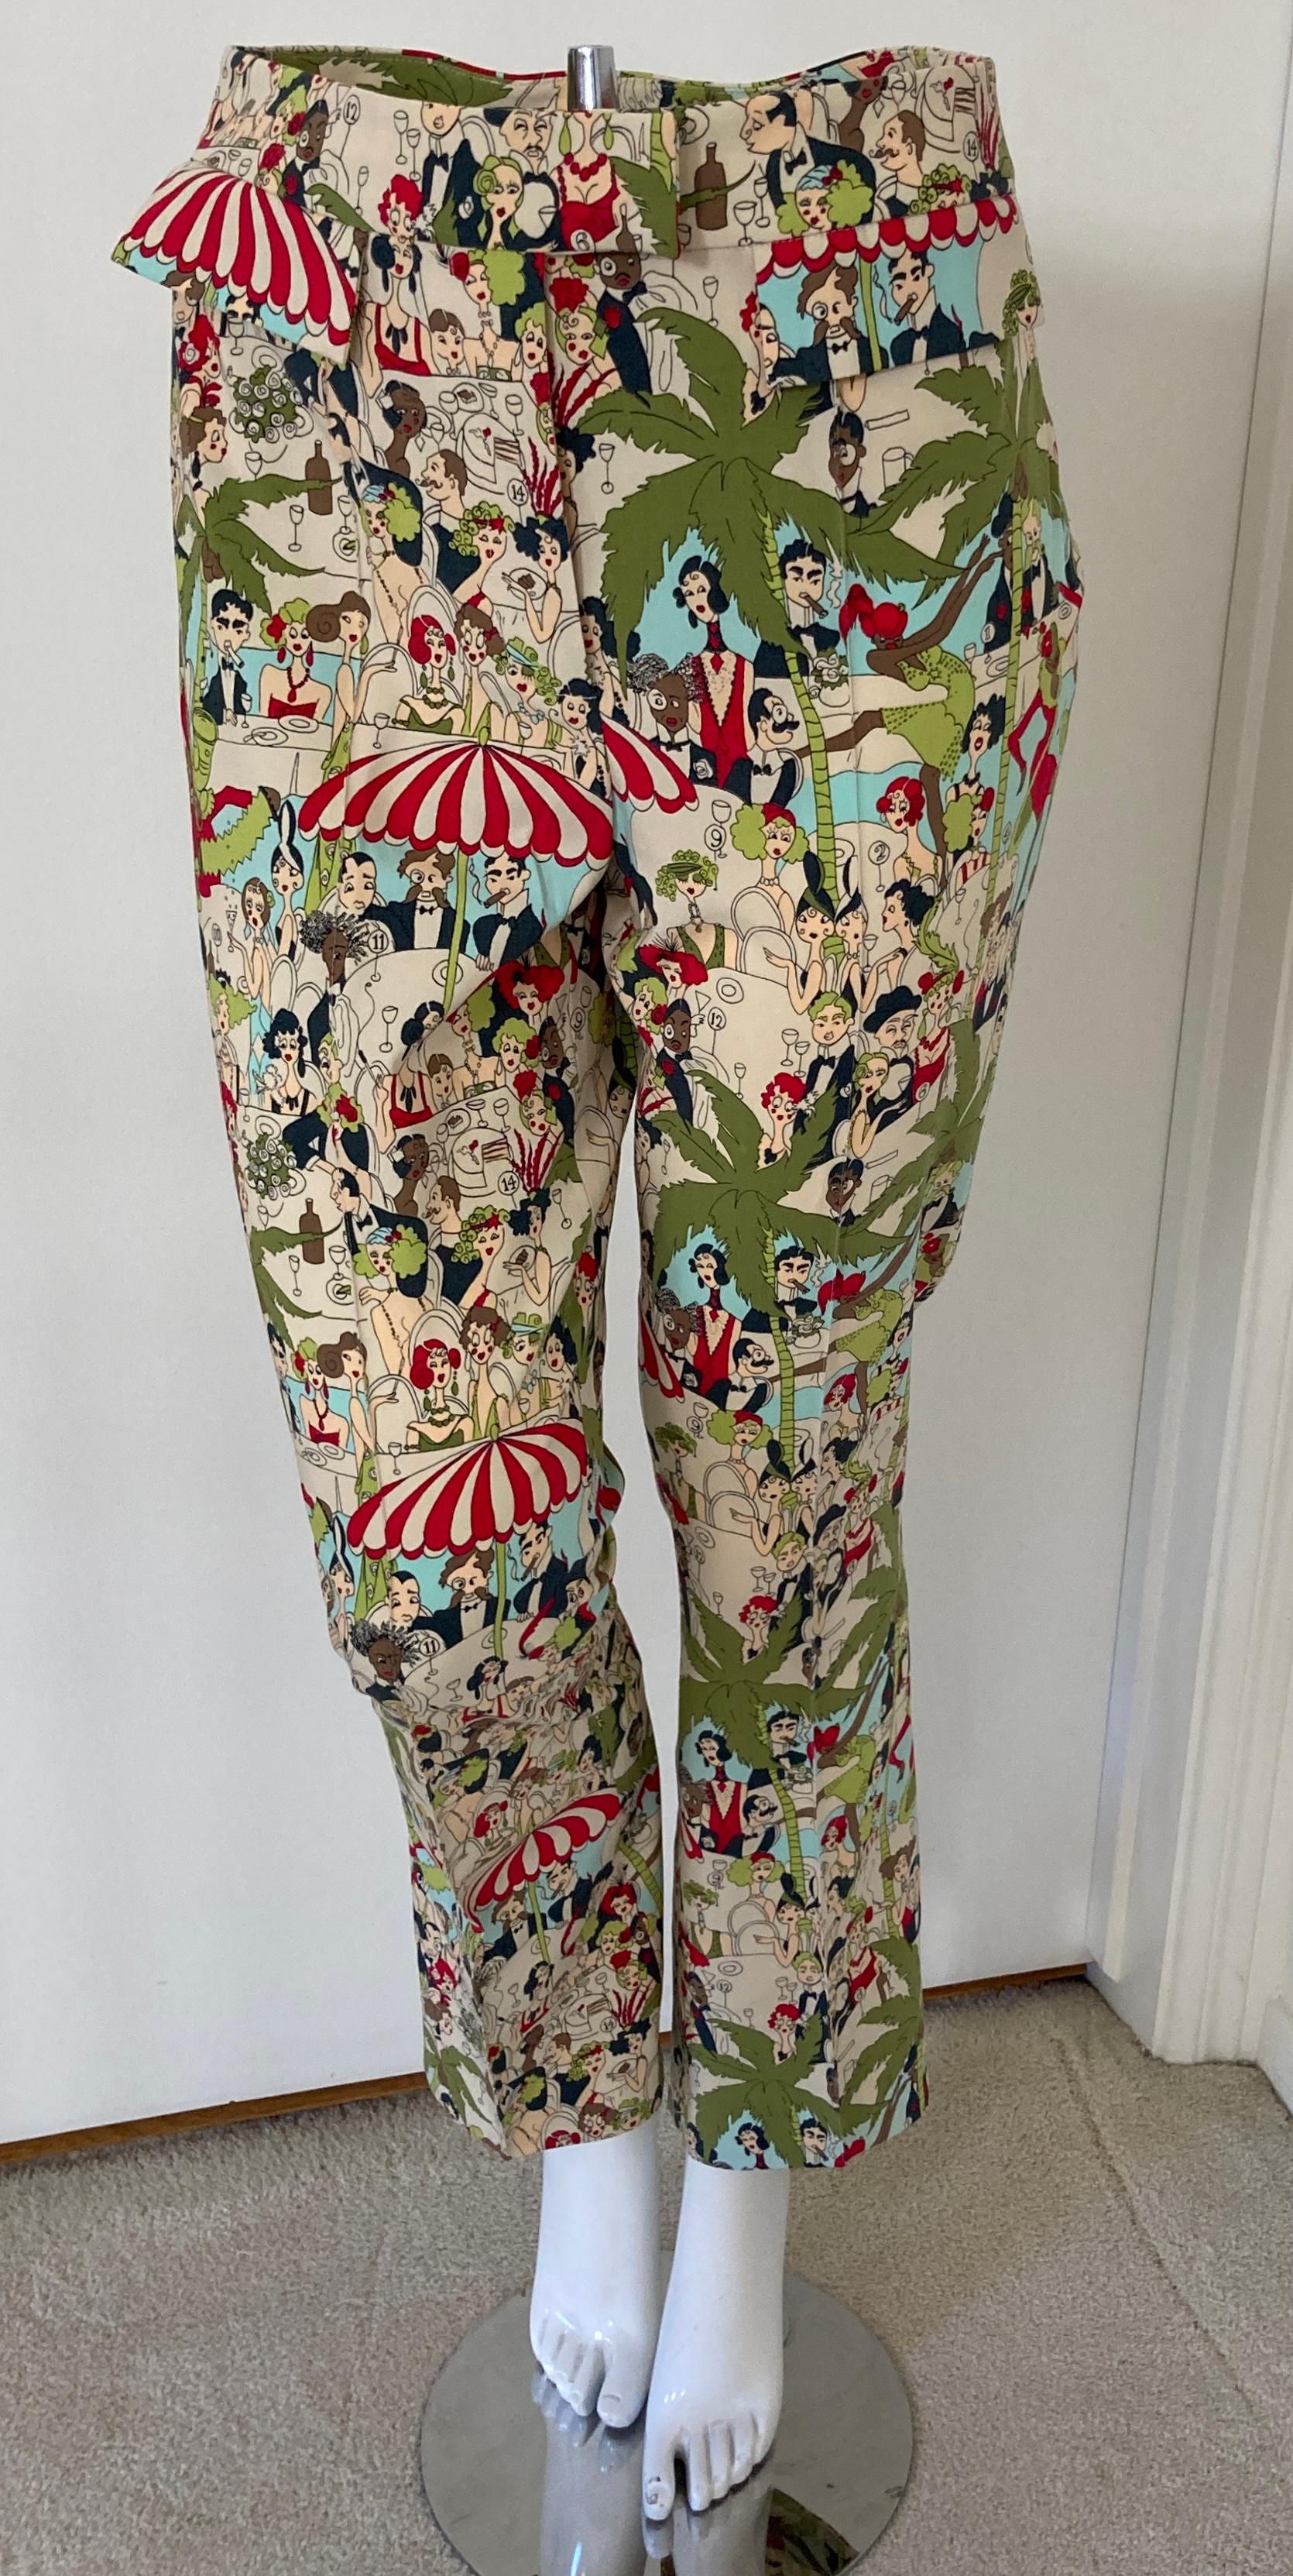 John Galliano Cafe Society print pants, flared leg trousers late 90s.
Vintage John Galliano silk like pants with all over a Cafe Society inspired illustrated print.
Vintage John Galliano graphic printed pants. Iconic Cafe Society print meets